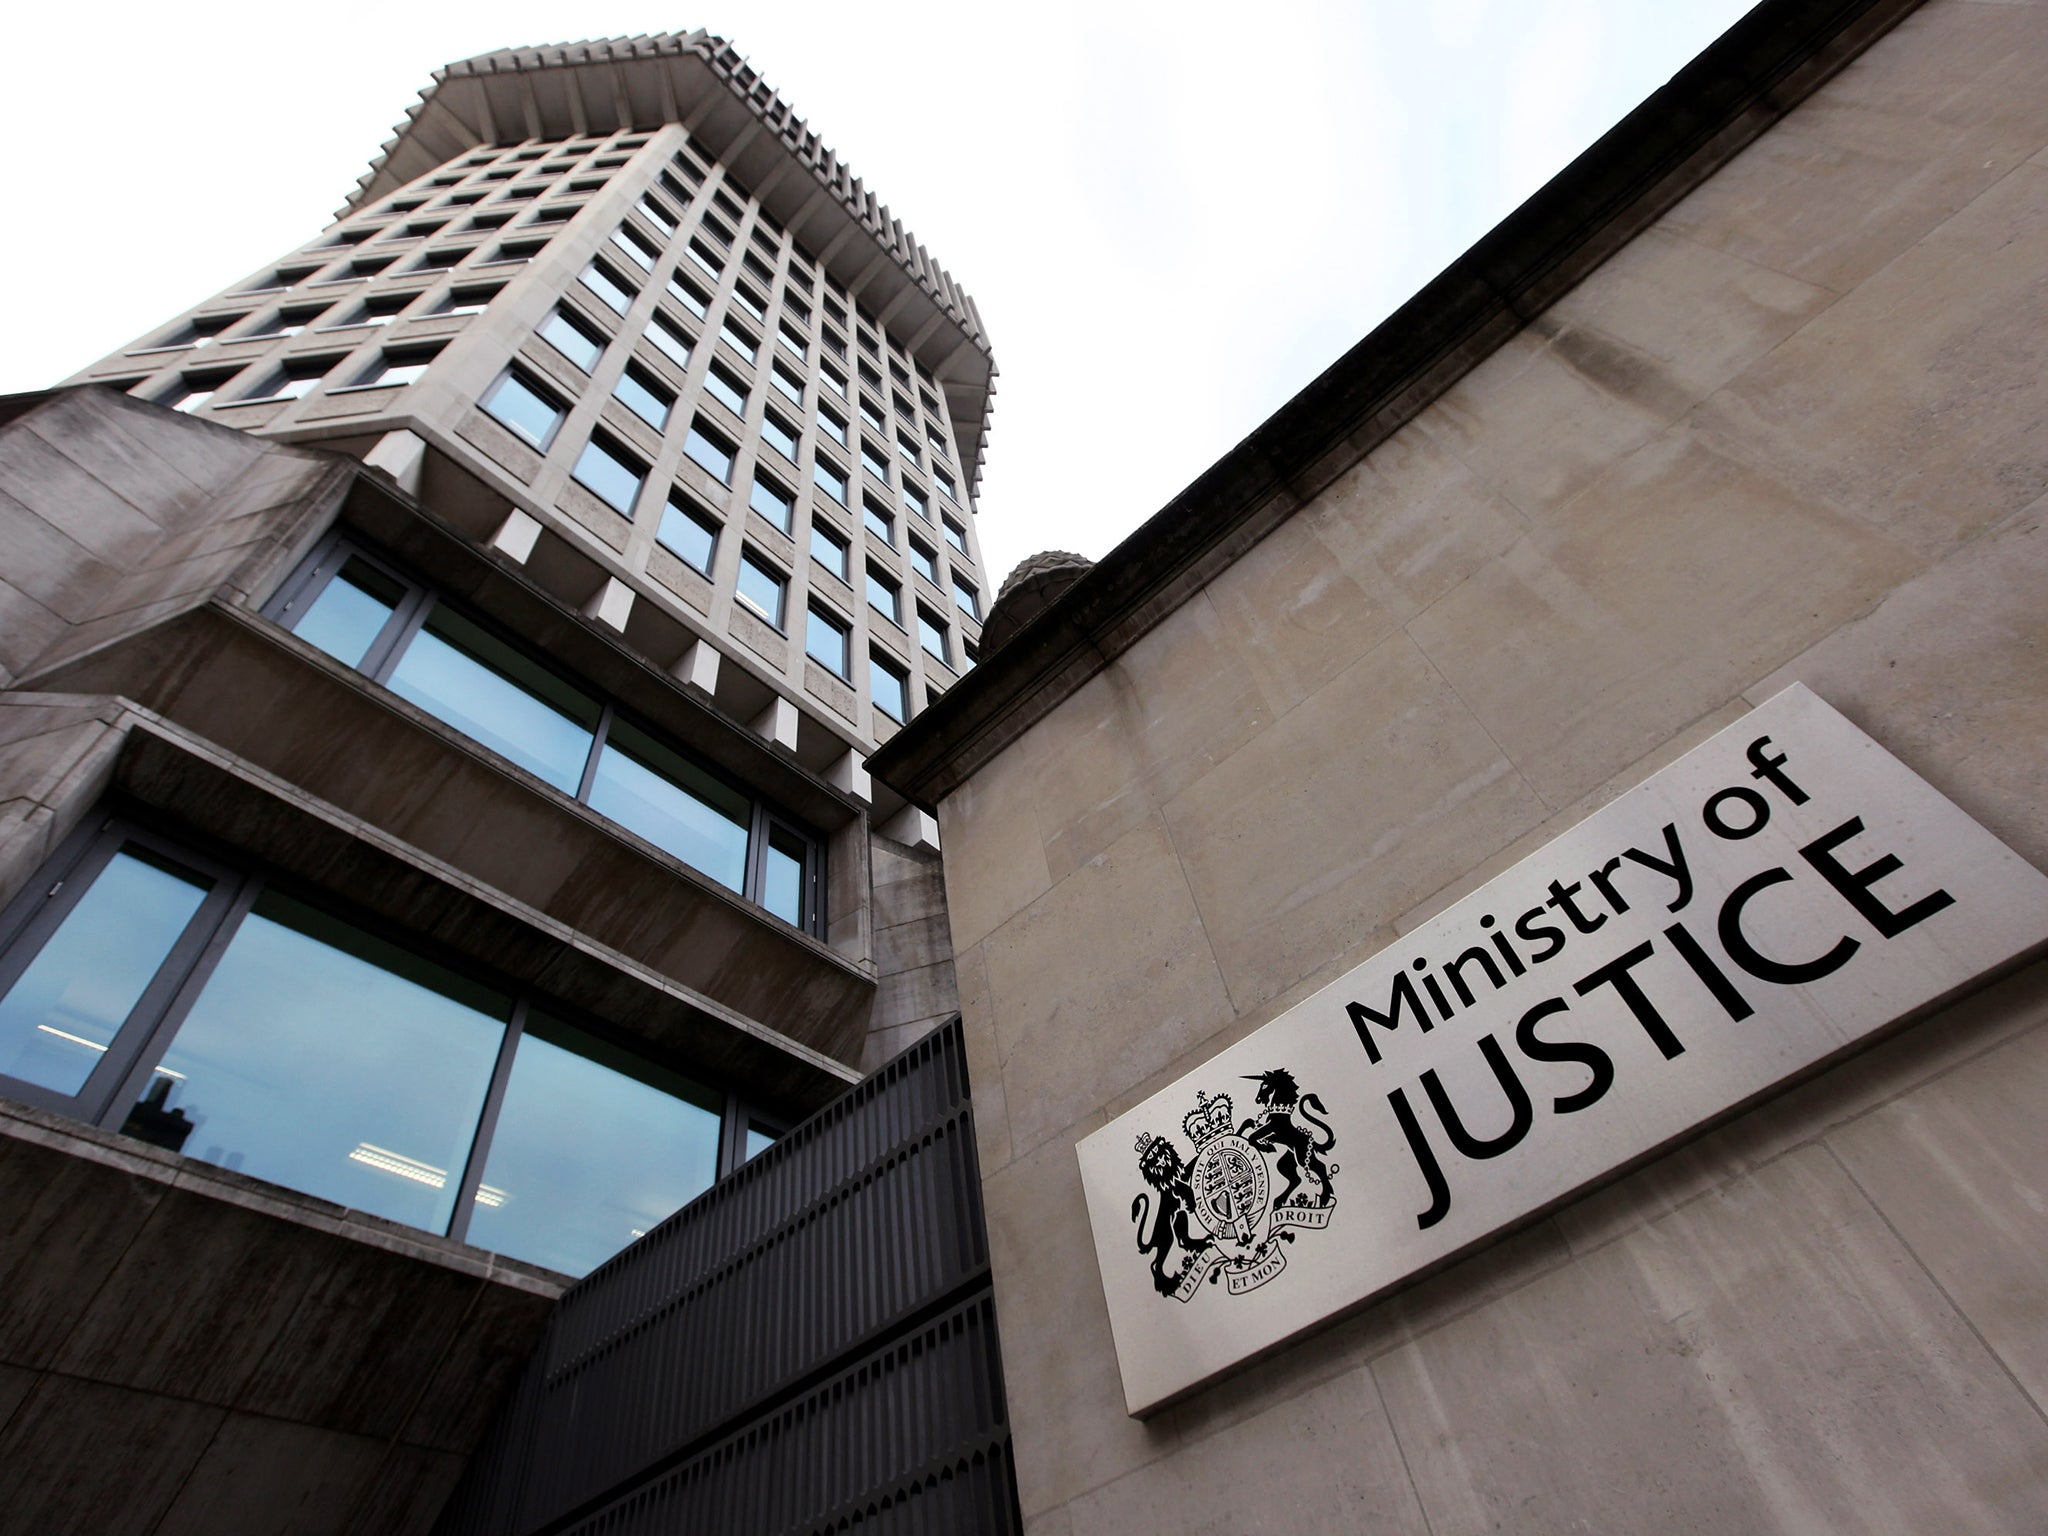 The Ministry of Justice prevented the Howard League for Penal reform from interviewing current prisoners